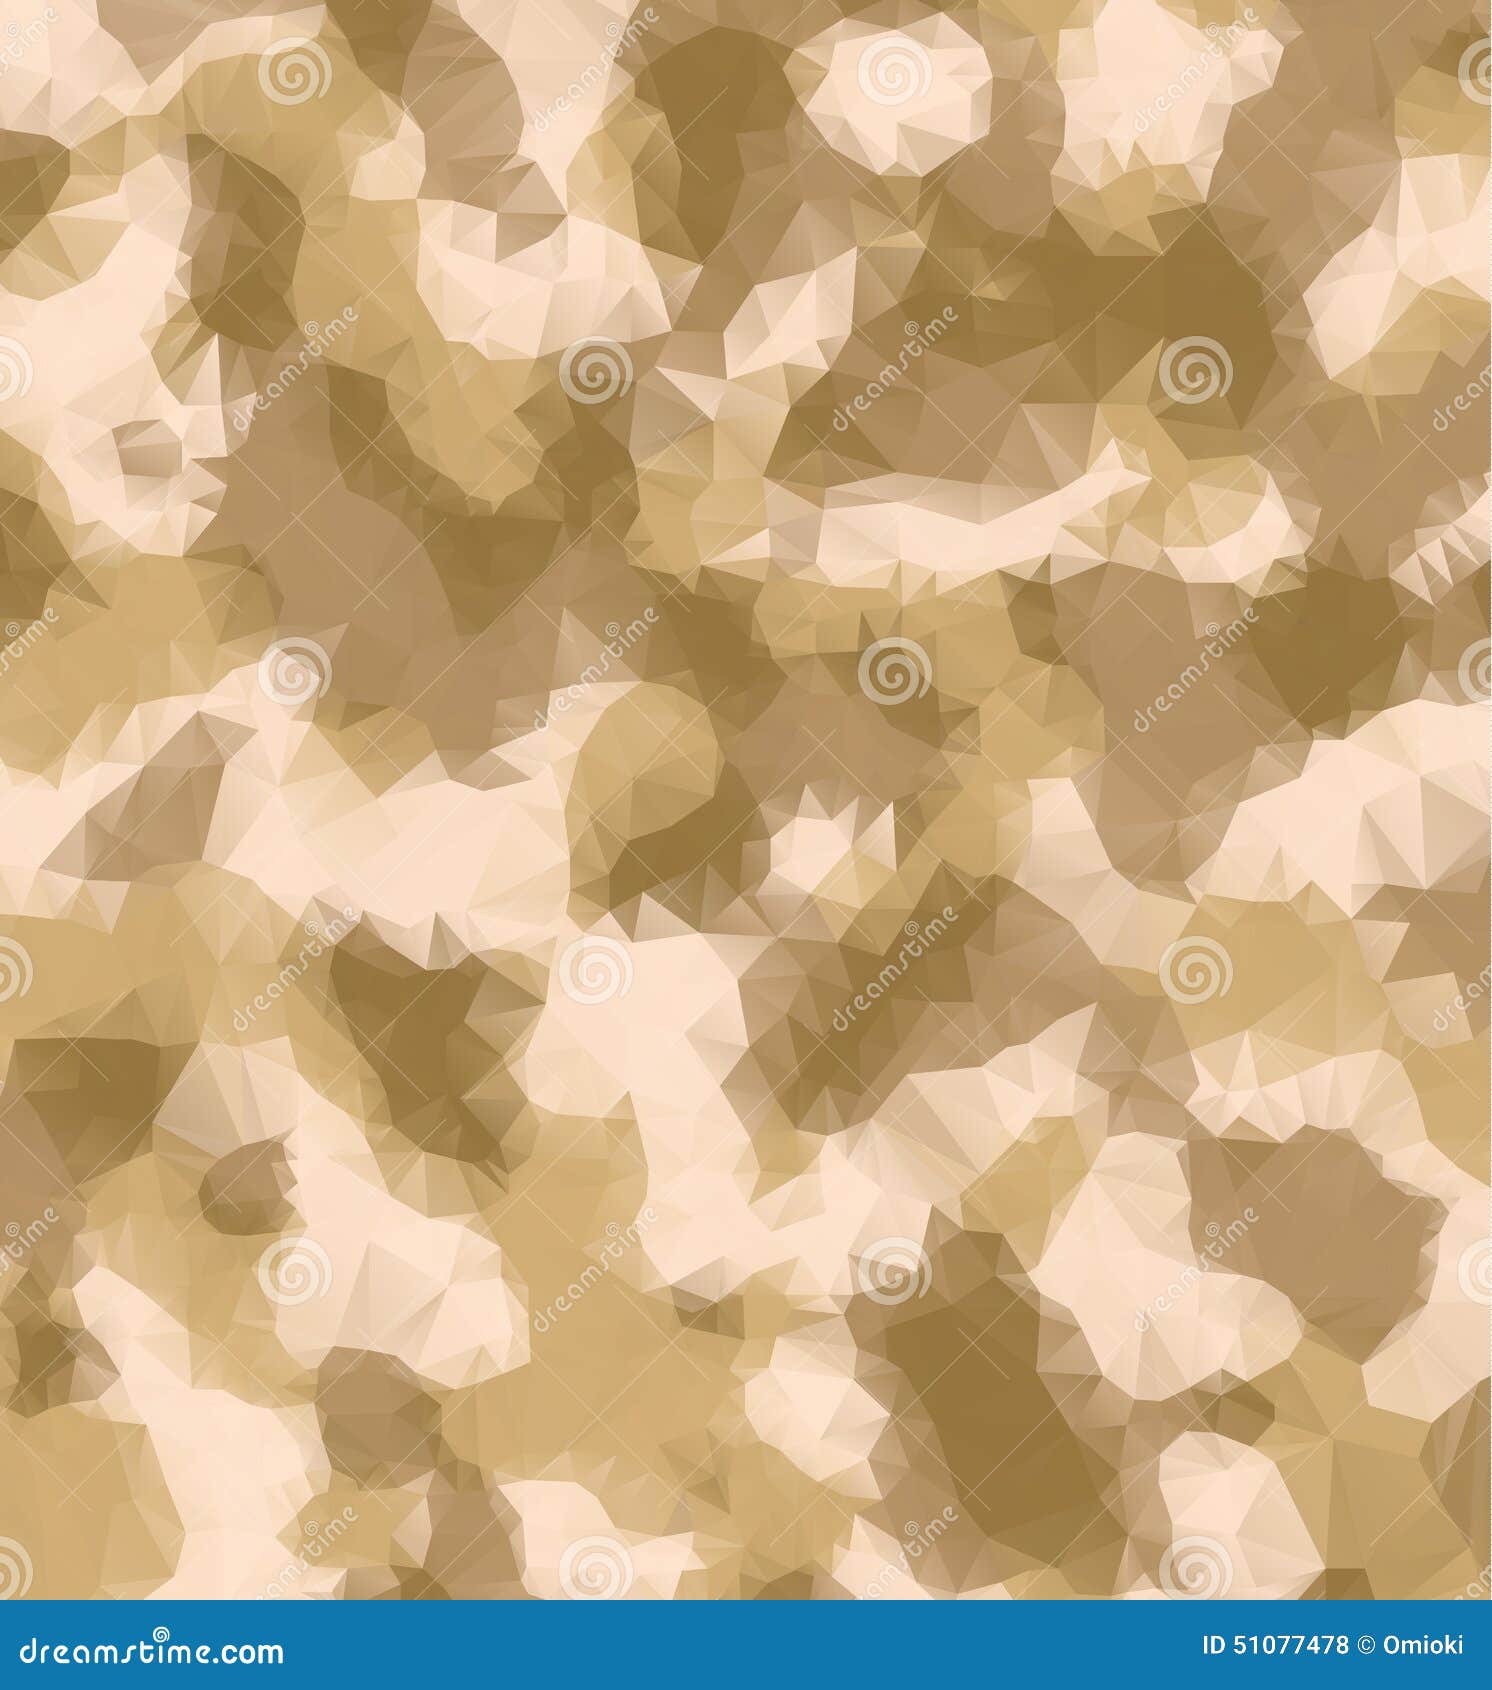 Triangle Military Camouflage Background Stock Vector - Illustration of ...